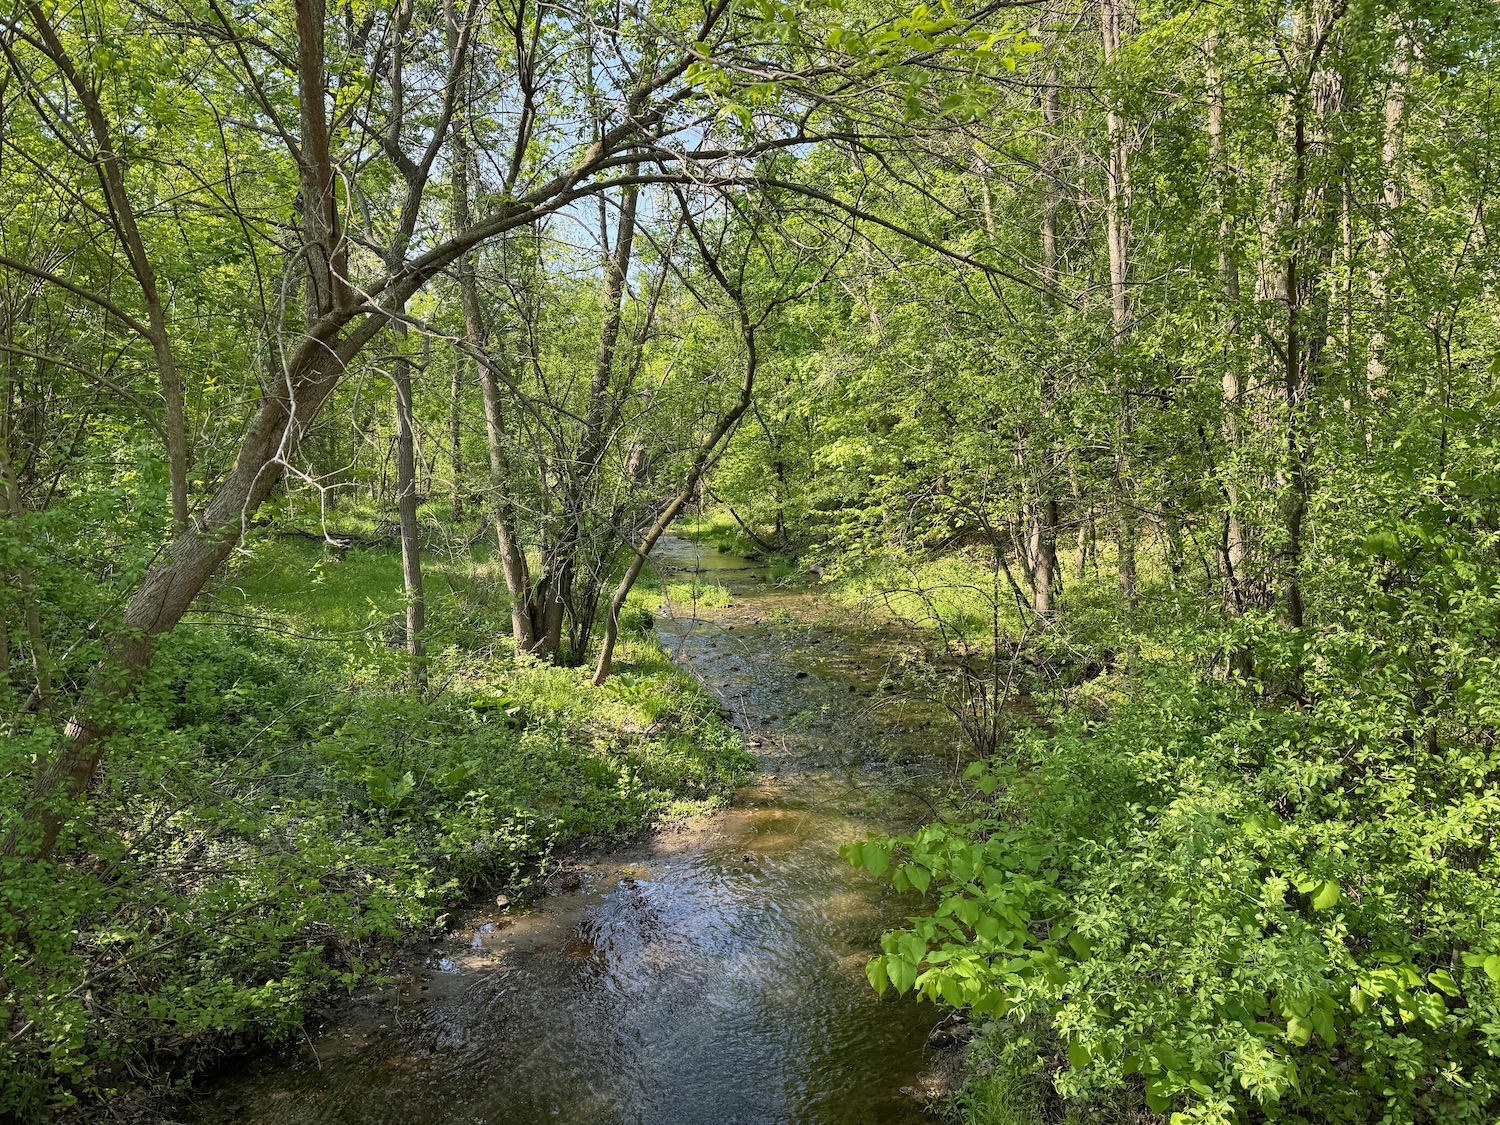 a stream in a forest